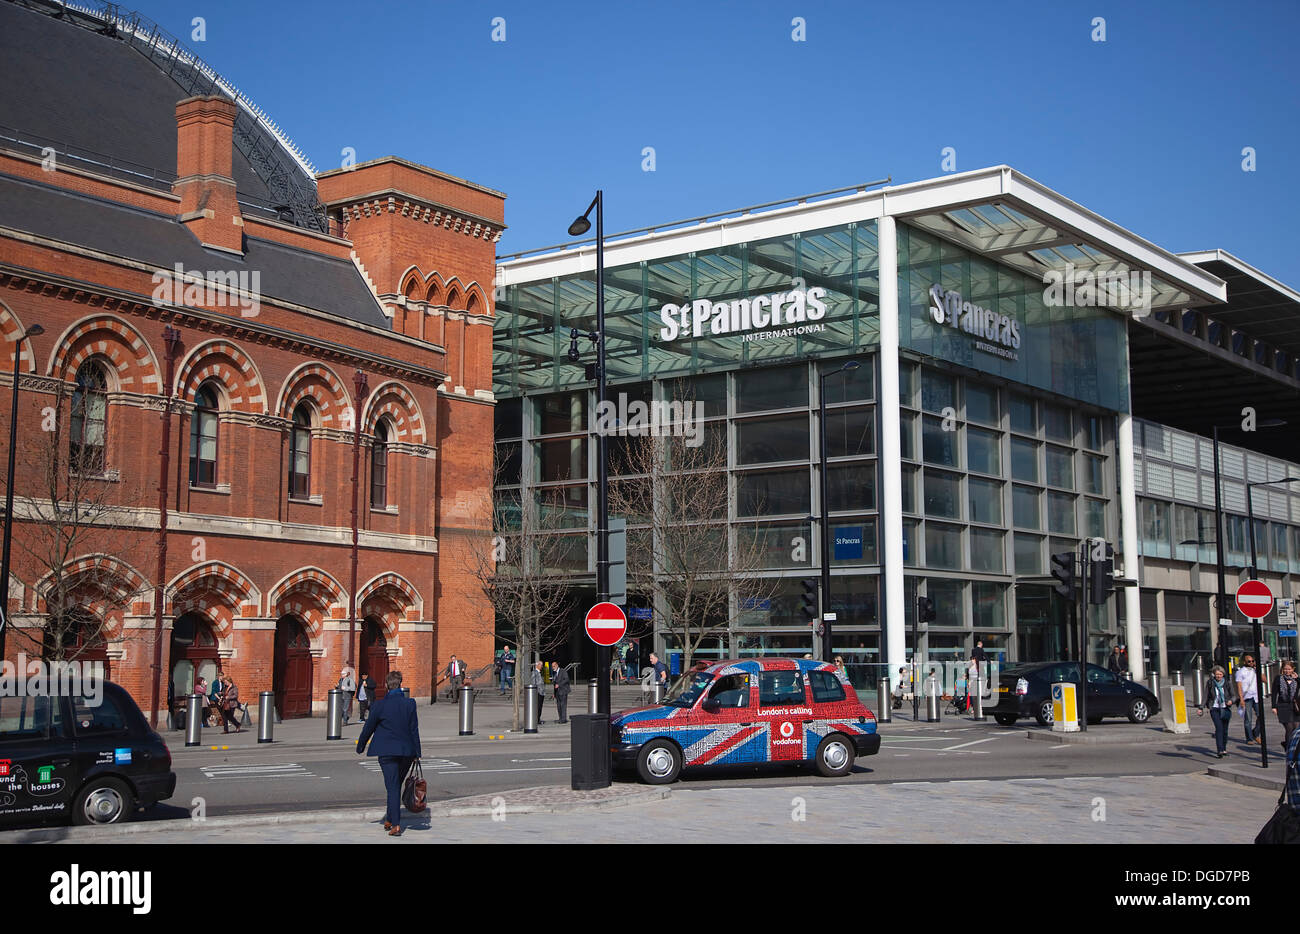 England, London, Taxi cabs outside the entrance to St Pancras Railway Station. Stock Photo